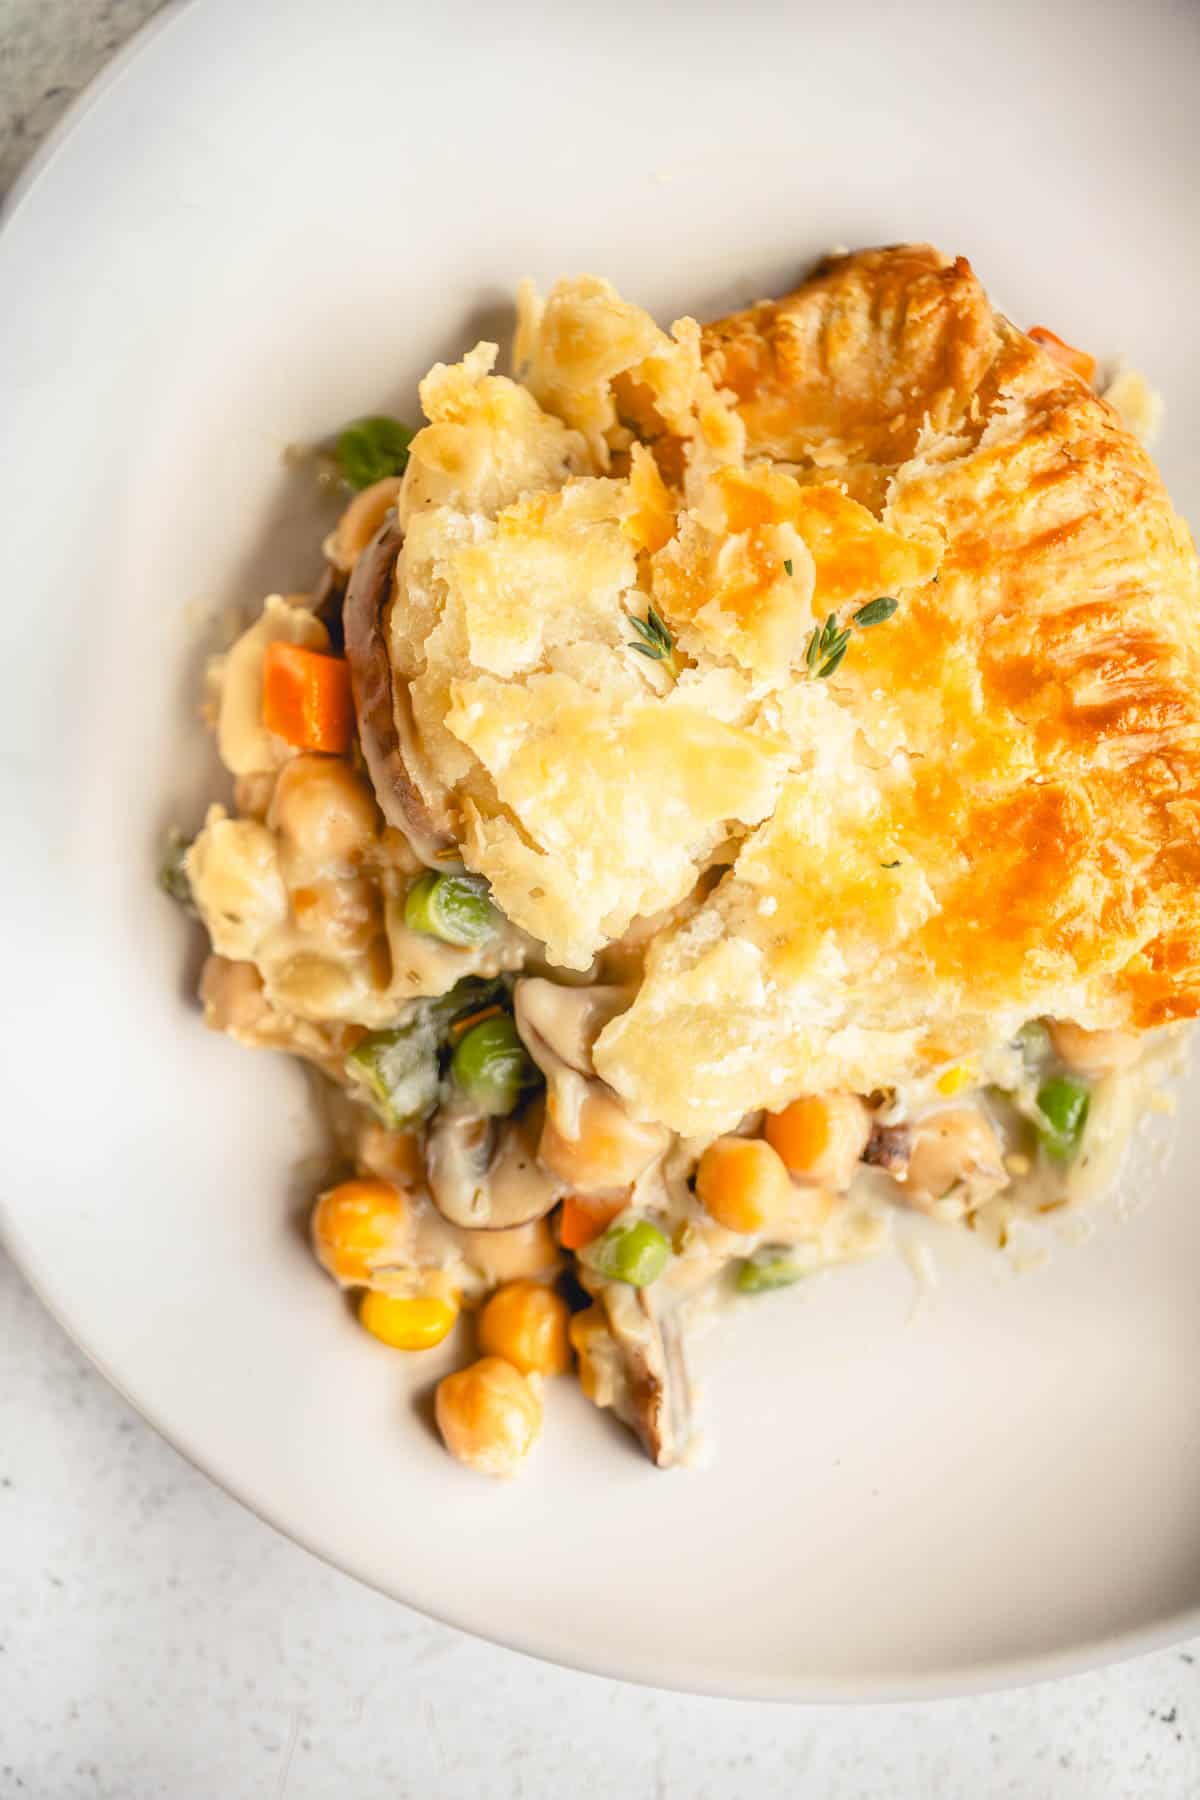 Portion of Vegetarian Vegetable Pot Pie with chickpeas on a plate.